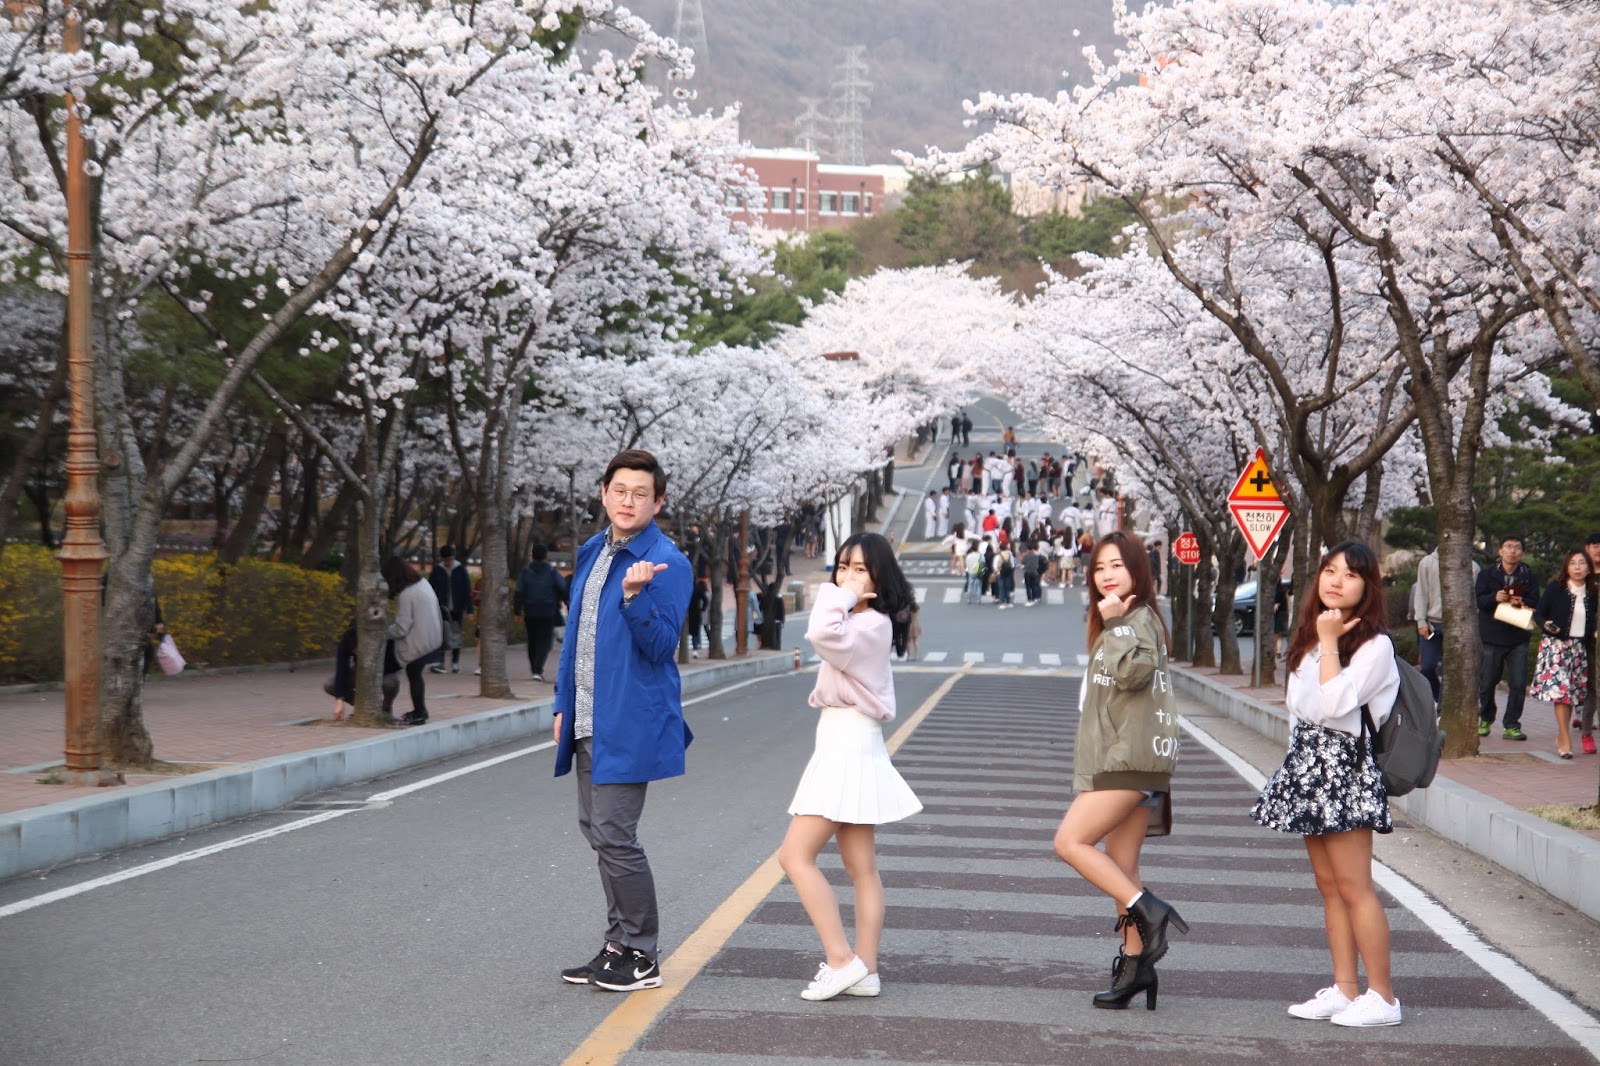 Absolutely Gorgeous Blooming Cherry Blossom Photos Ever, in Daegu South Kor...